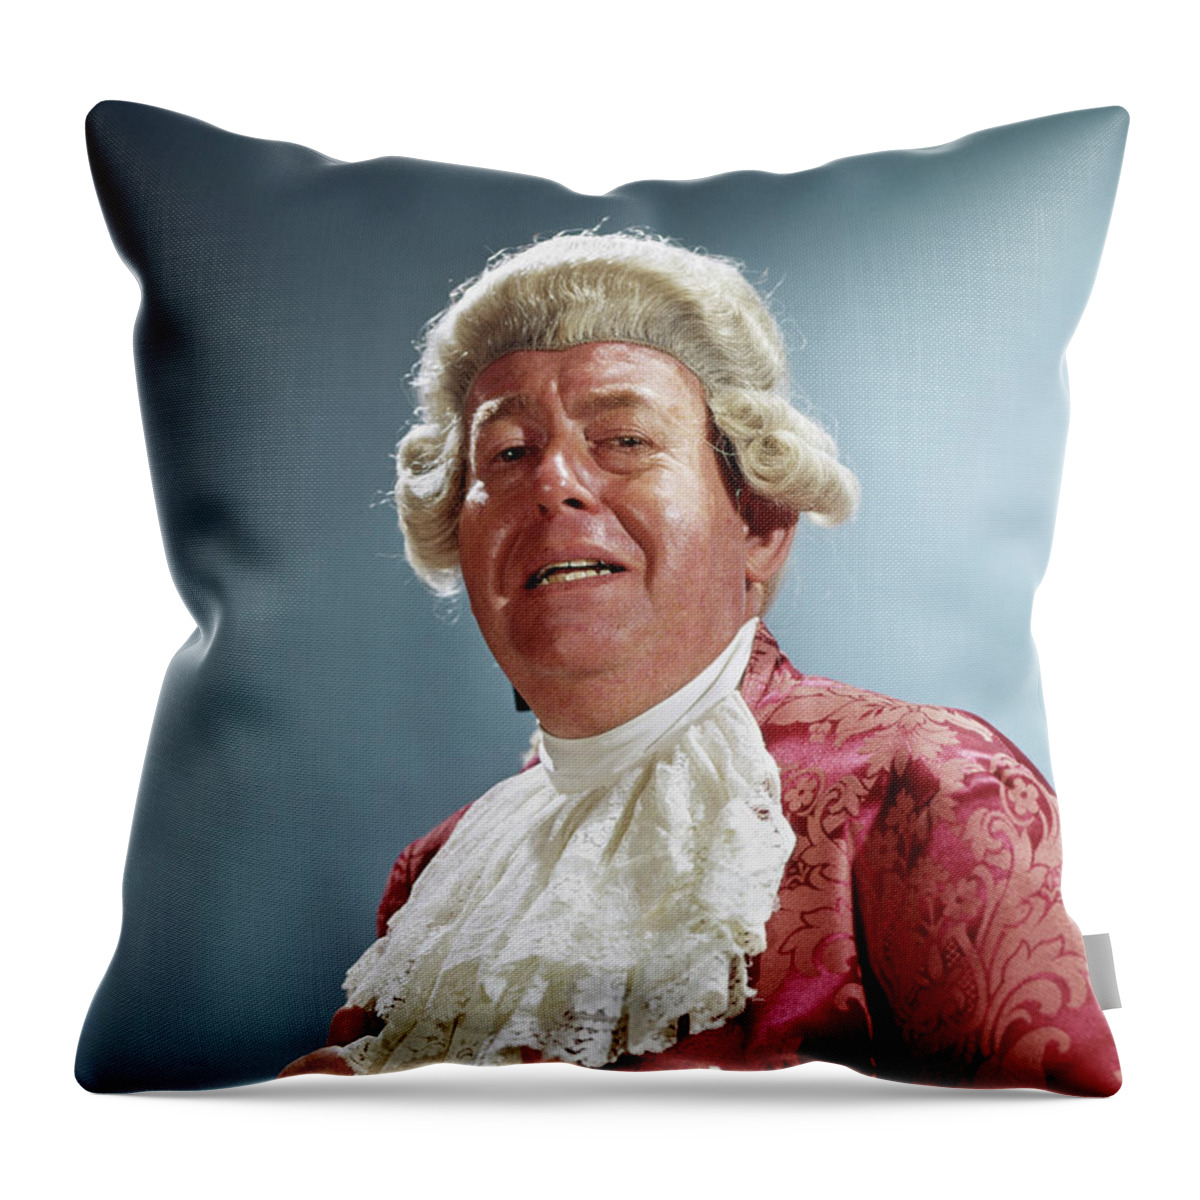 Photography Throw Pillow featuring the photograph 1960s Man Wear 18th Century Colonial by Vintage Images